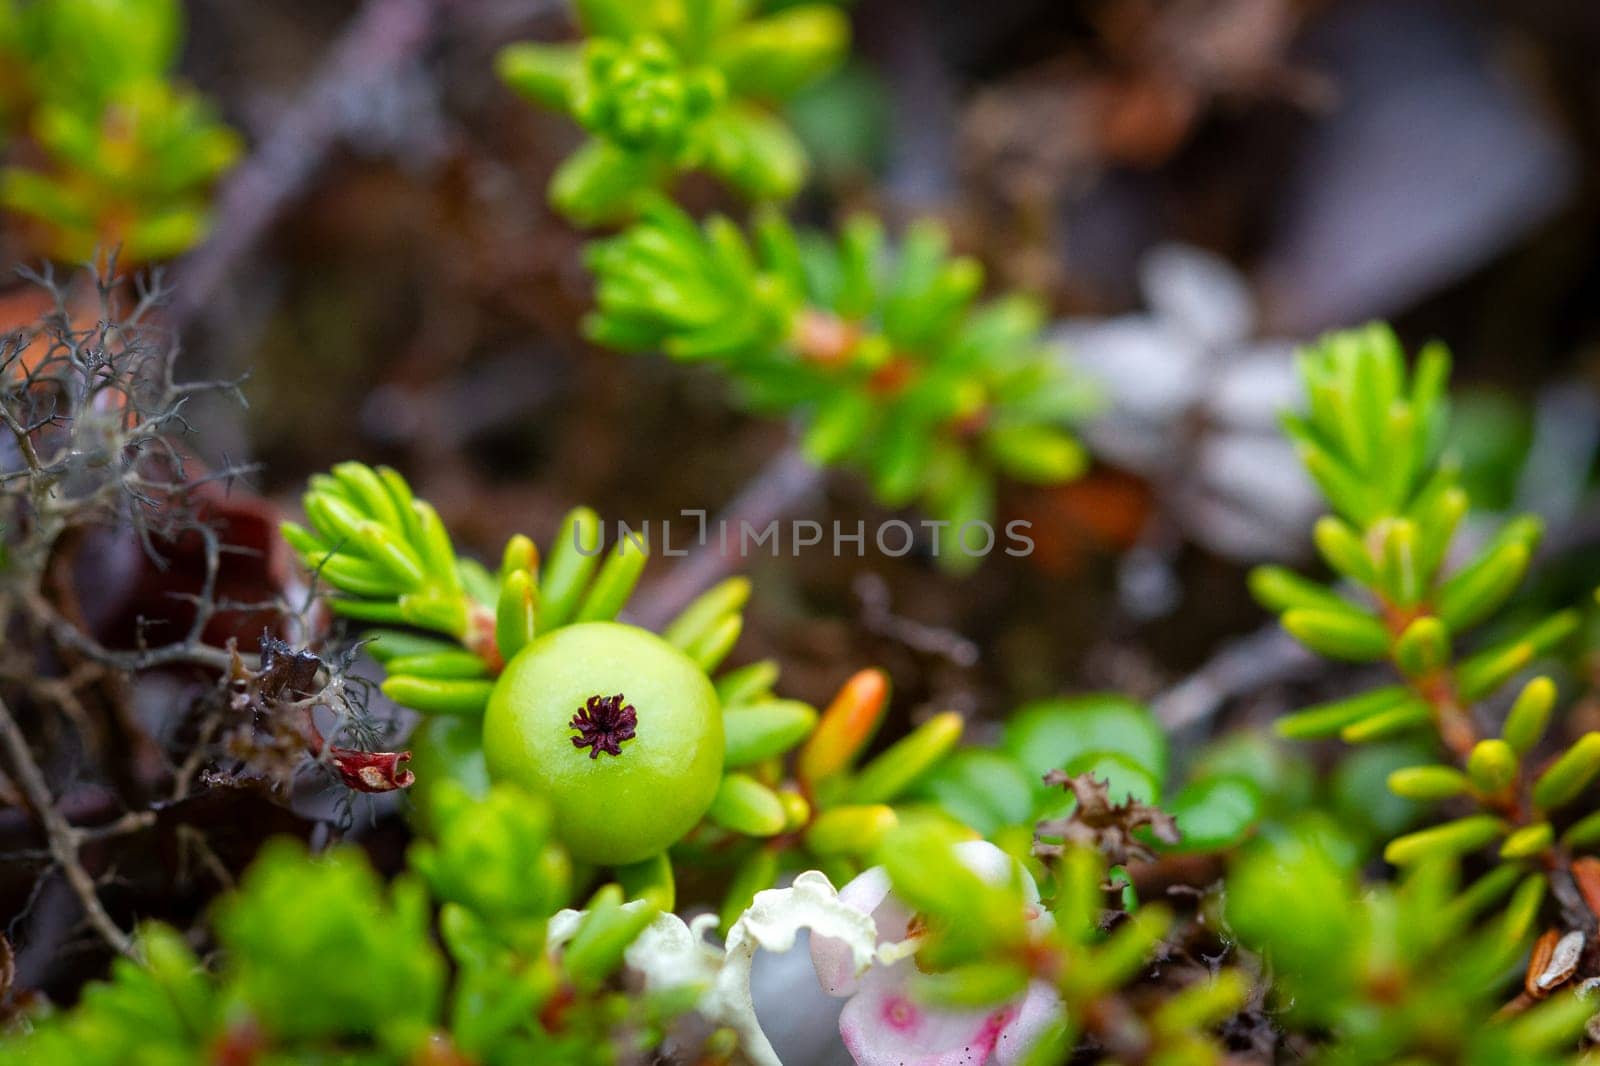 Crowberry, also known as blackberry, in its green phase before ripening, found on the arctic tundra with other plants in the background, Nunavut, Canada